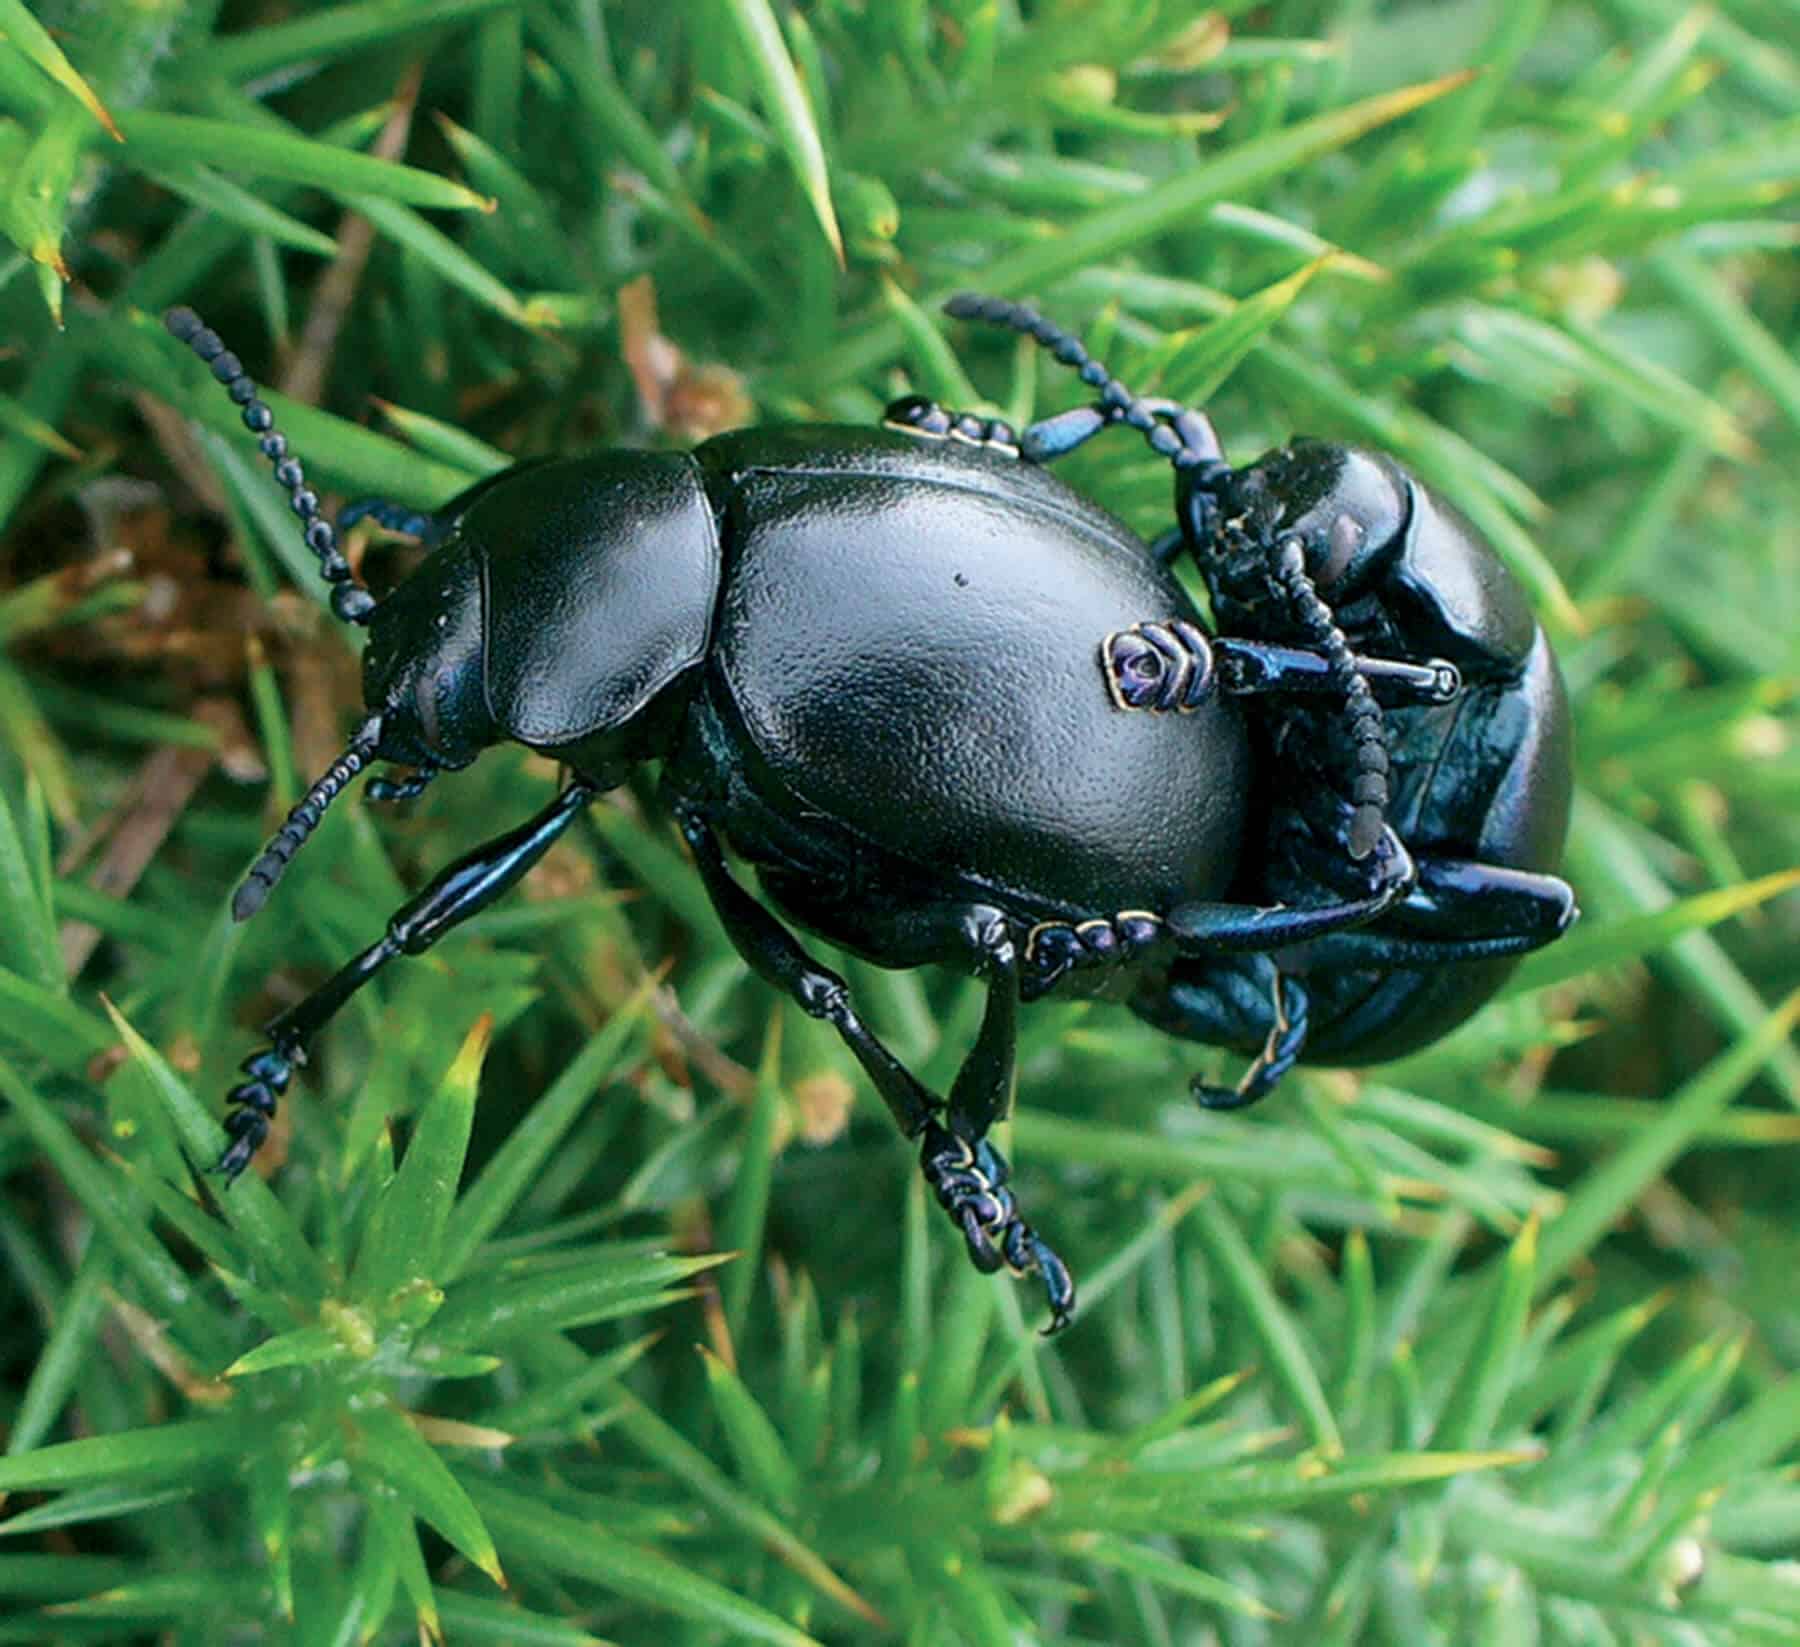 A leaf beetle in the grass